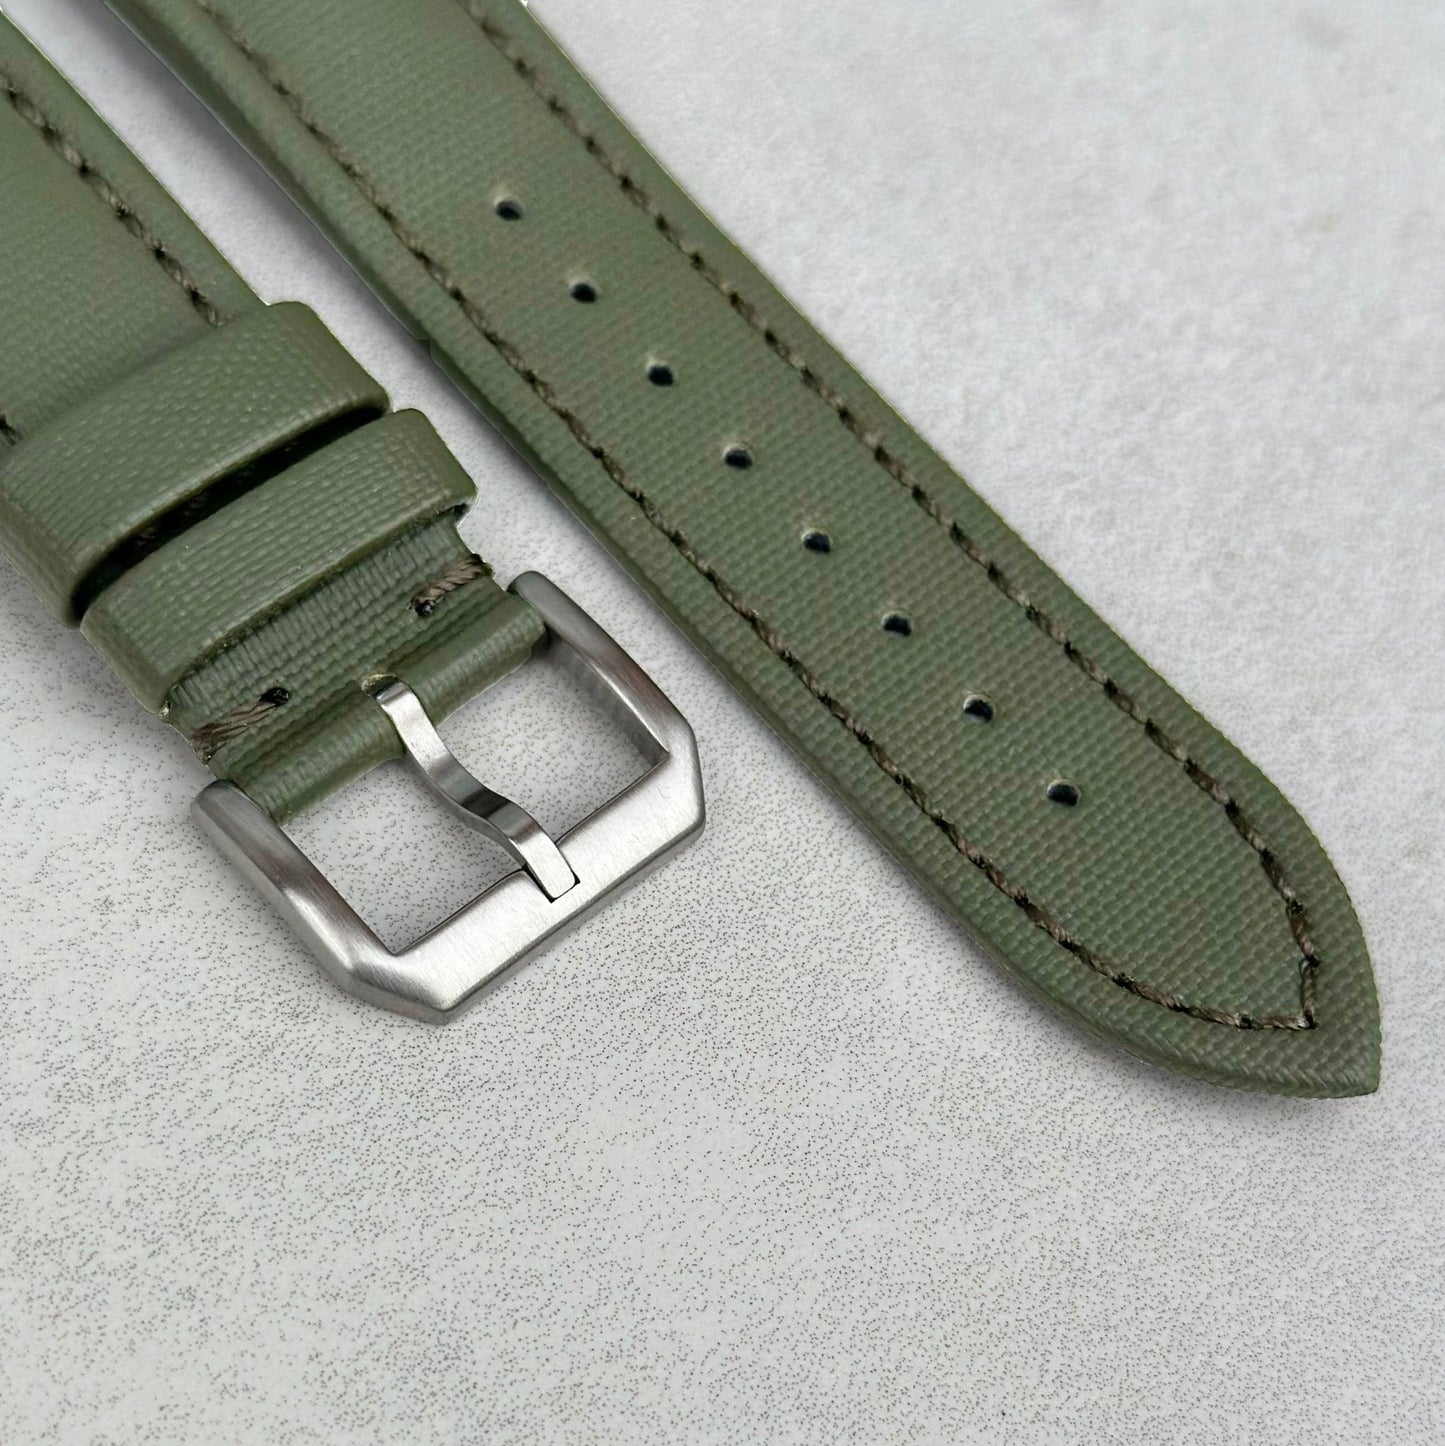 Brushed 316L stainless steel buckle on the Bermuda khaki green sail cloth watch strap.